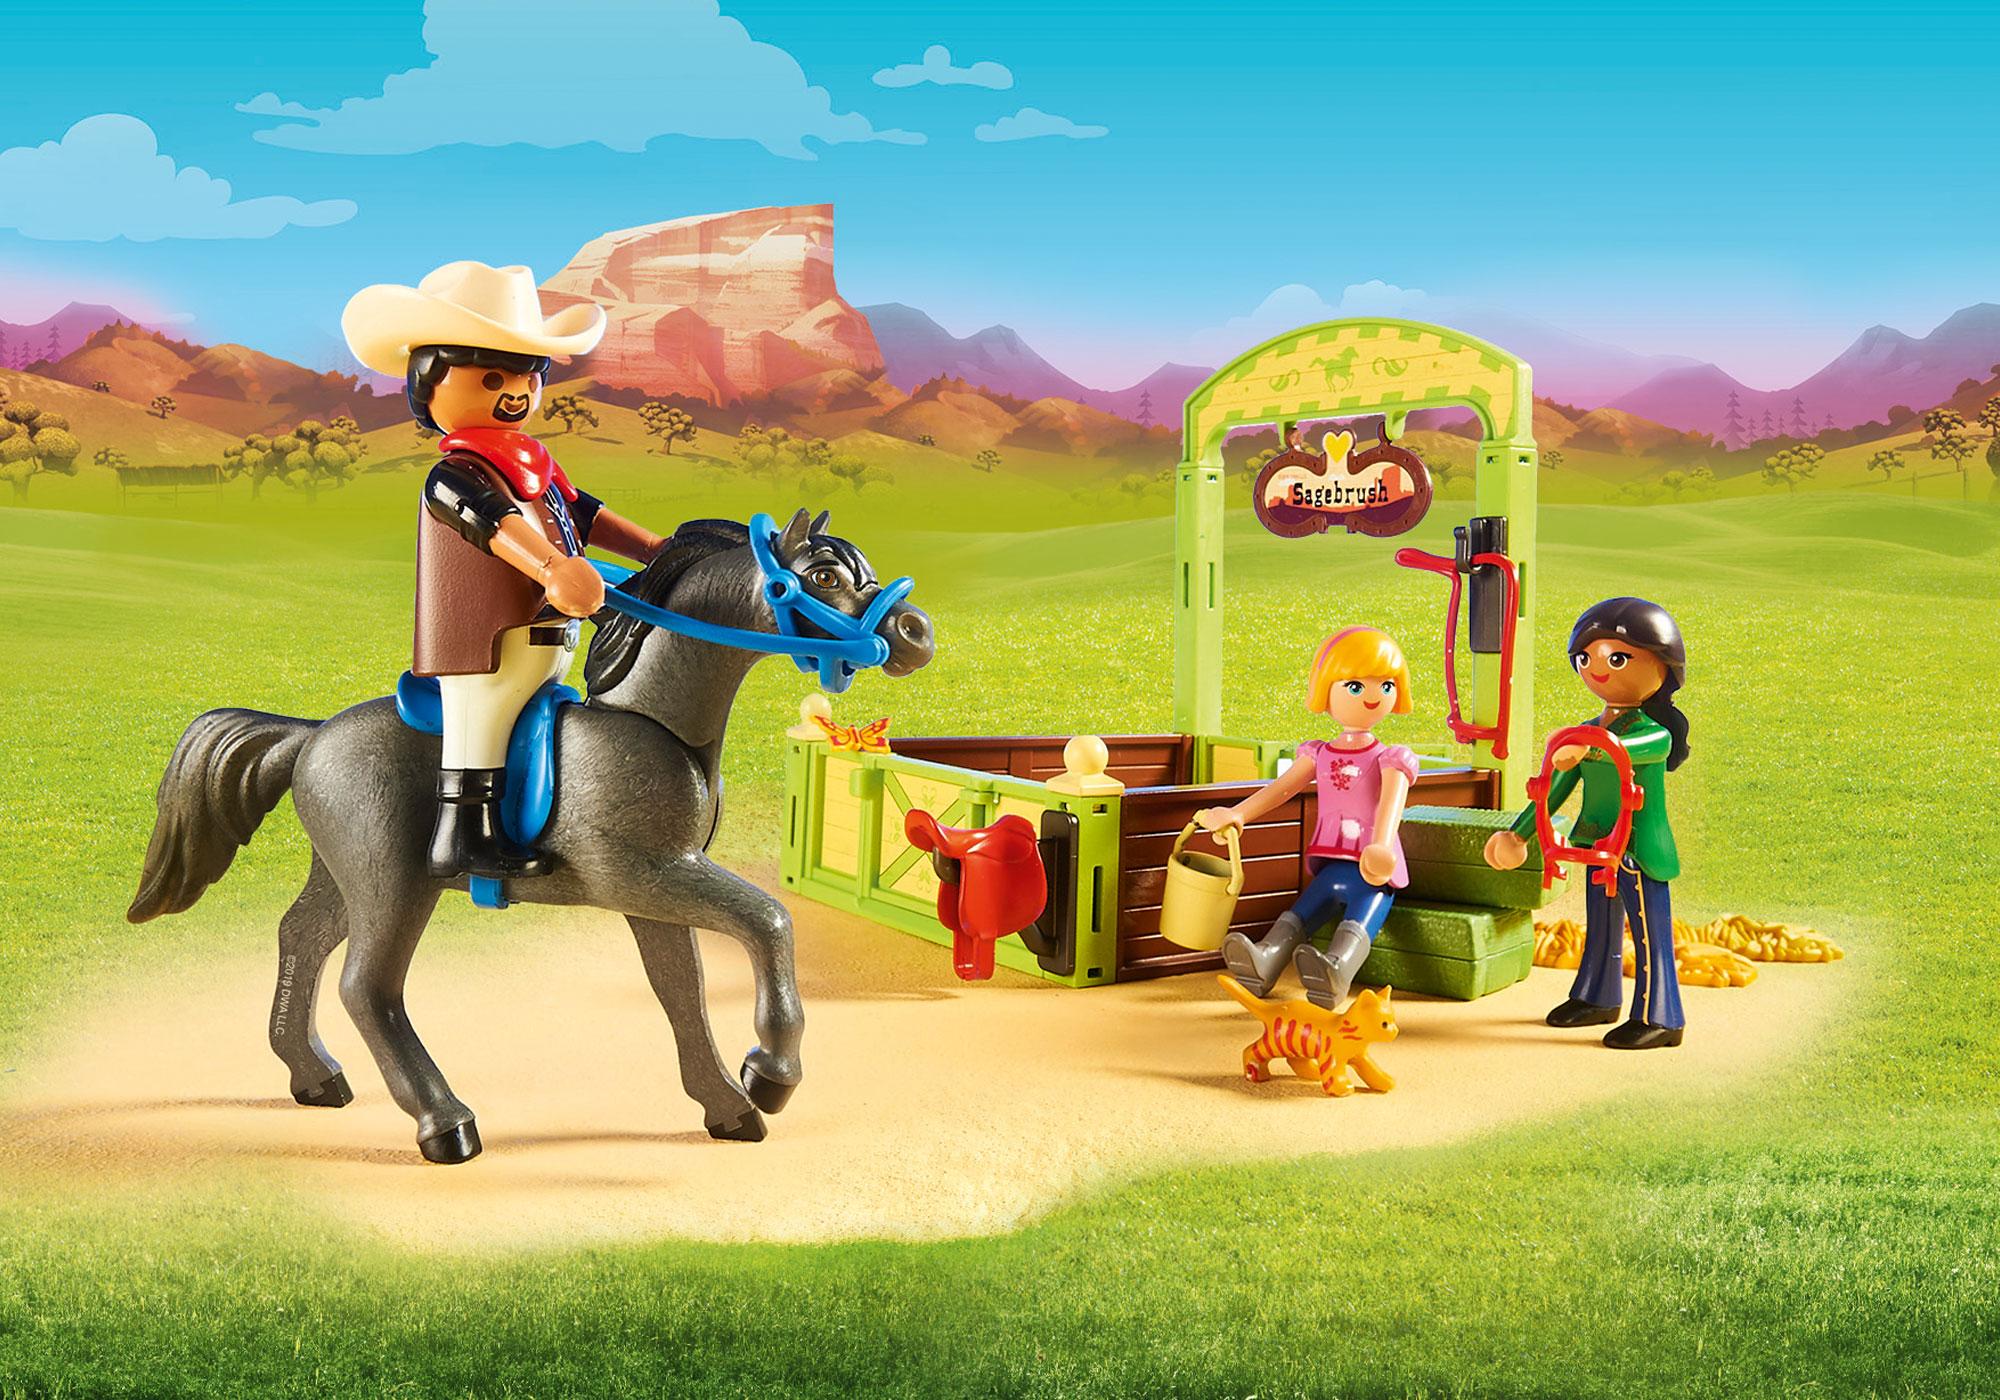 playmobil horse and rider